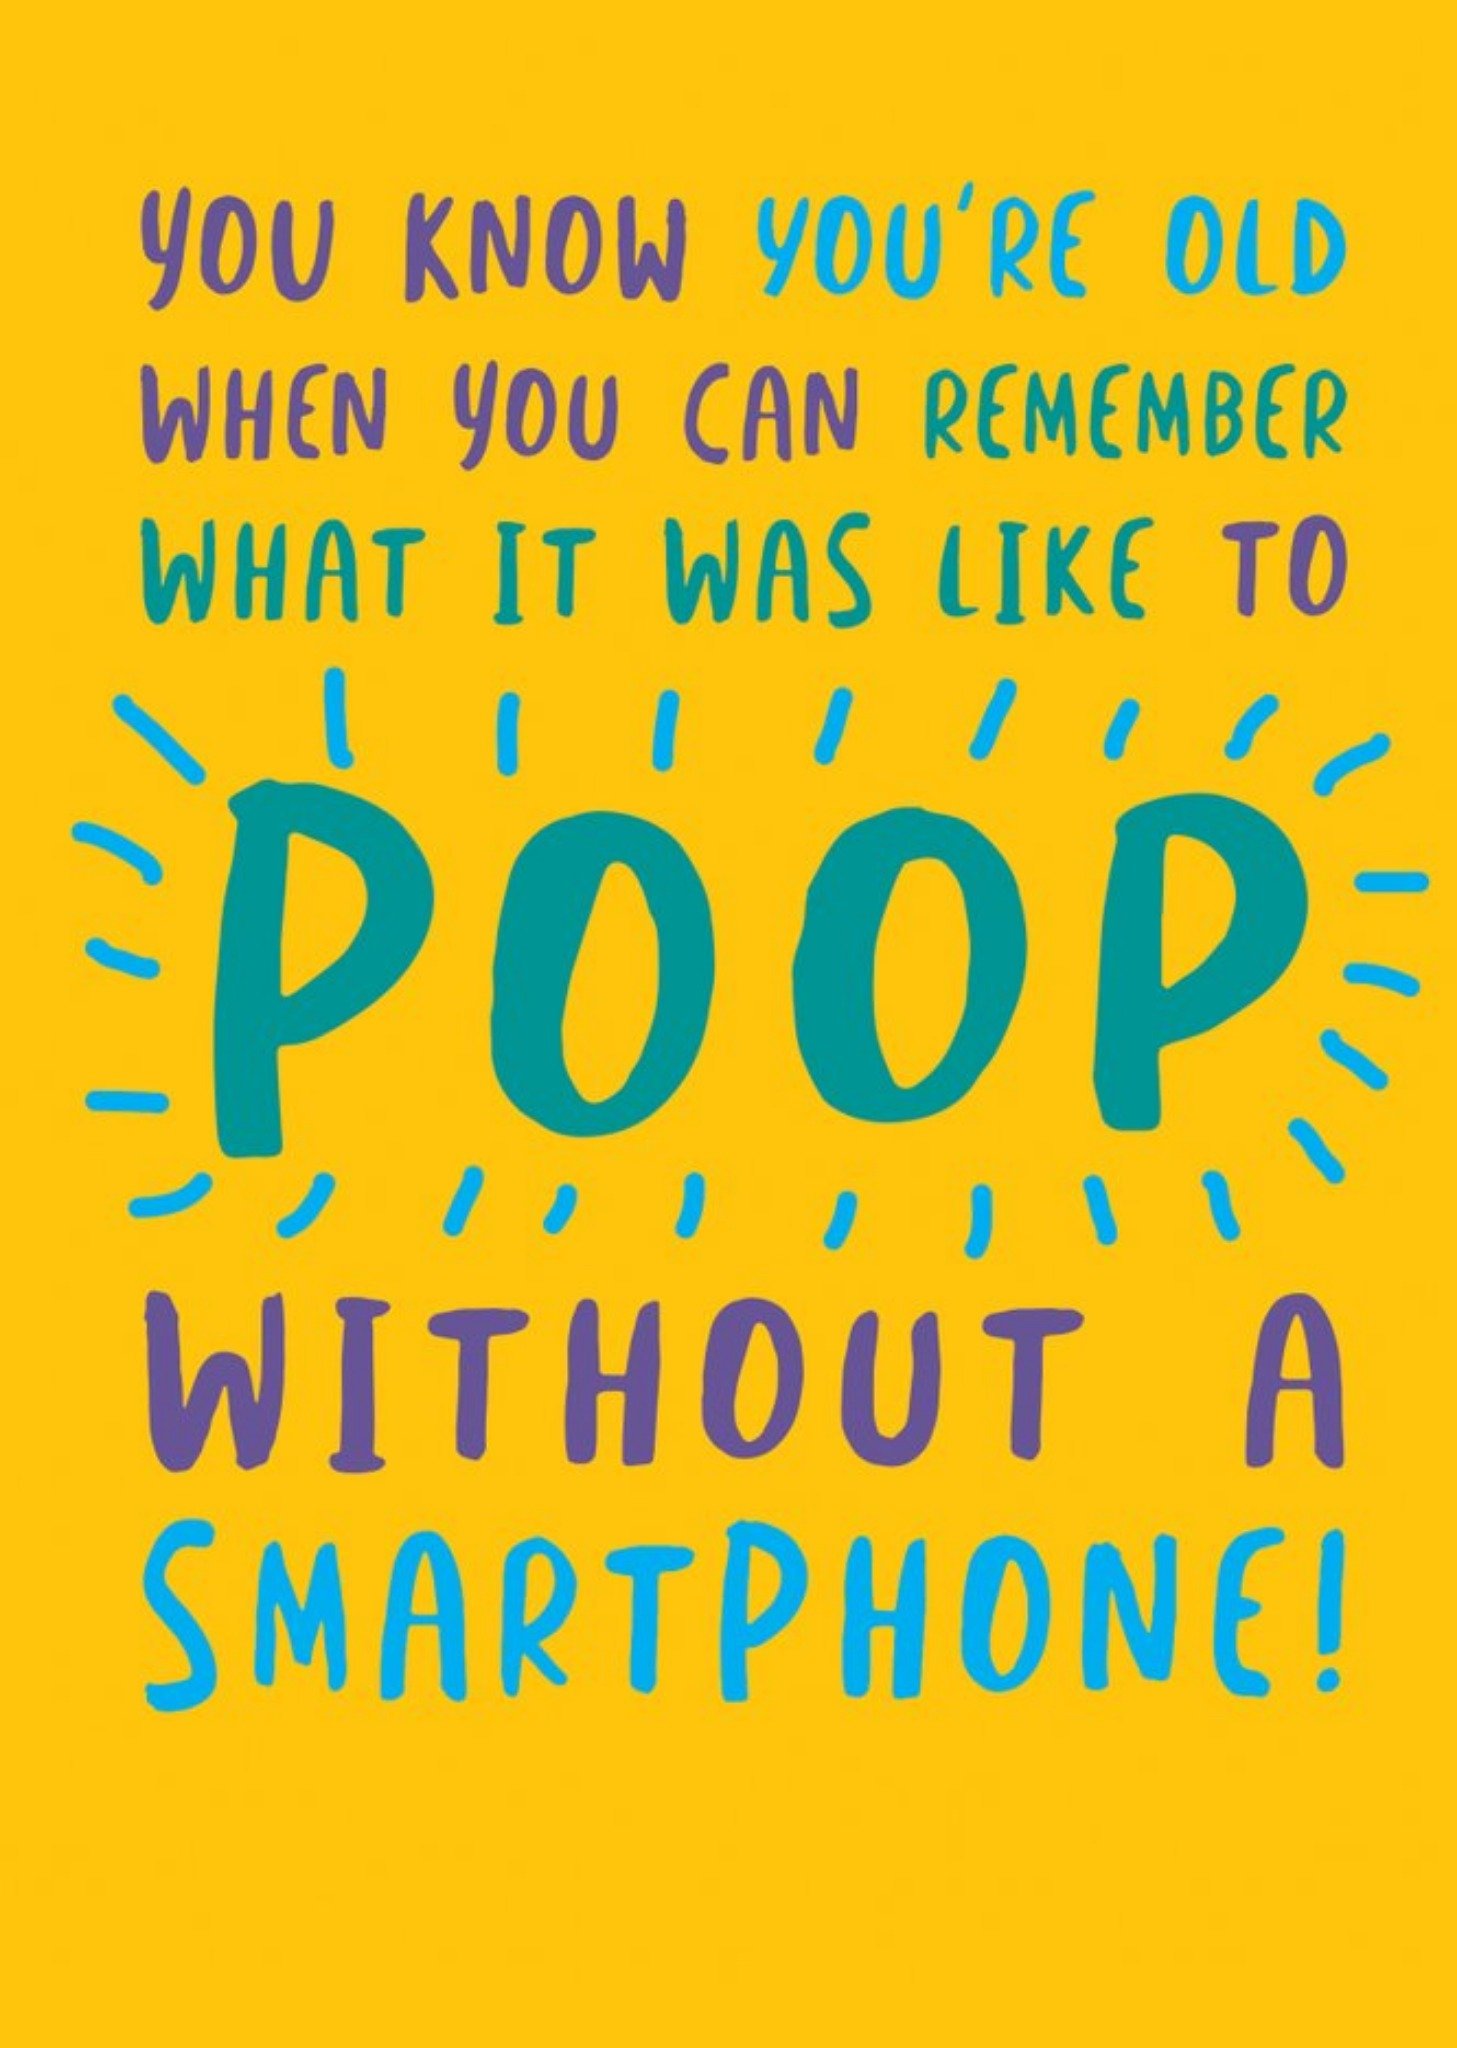 Moonpig Remember What Its Like To Poop Without A Smartphone Birthday Card, Large